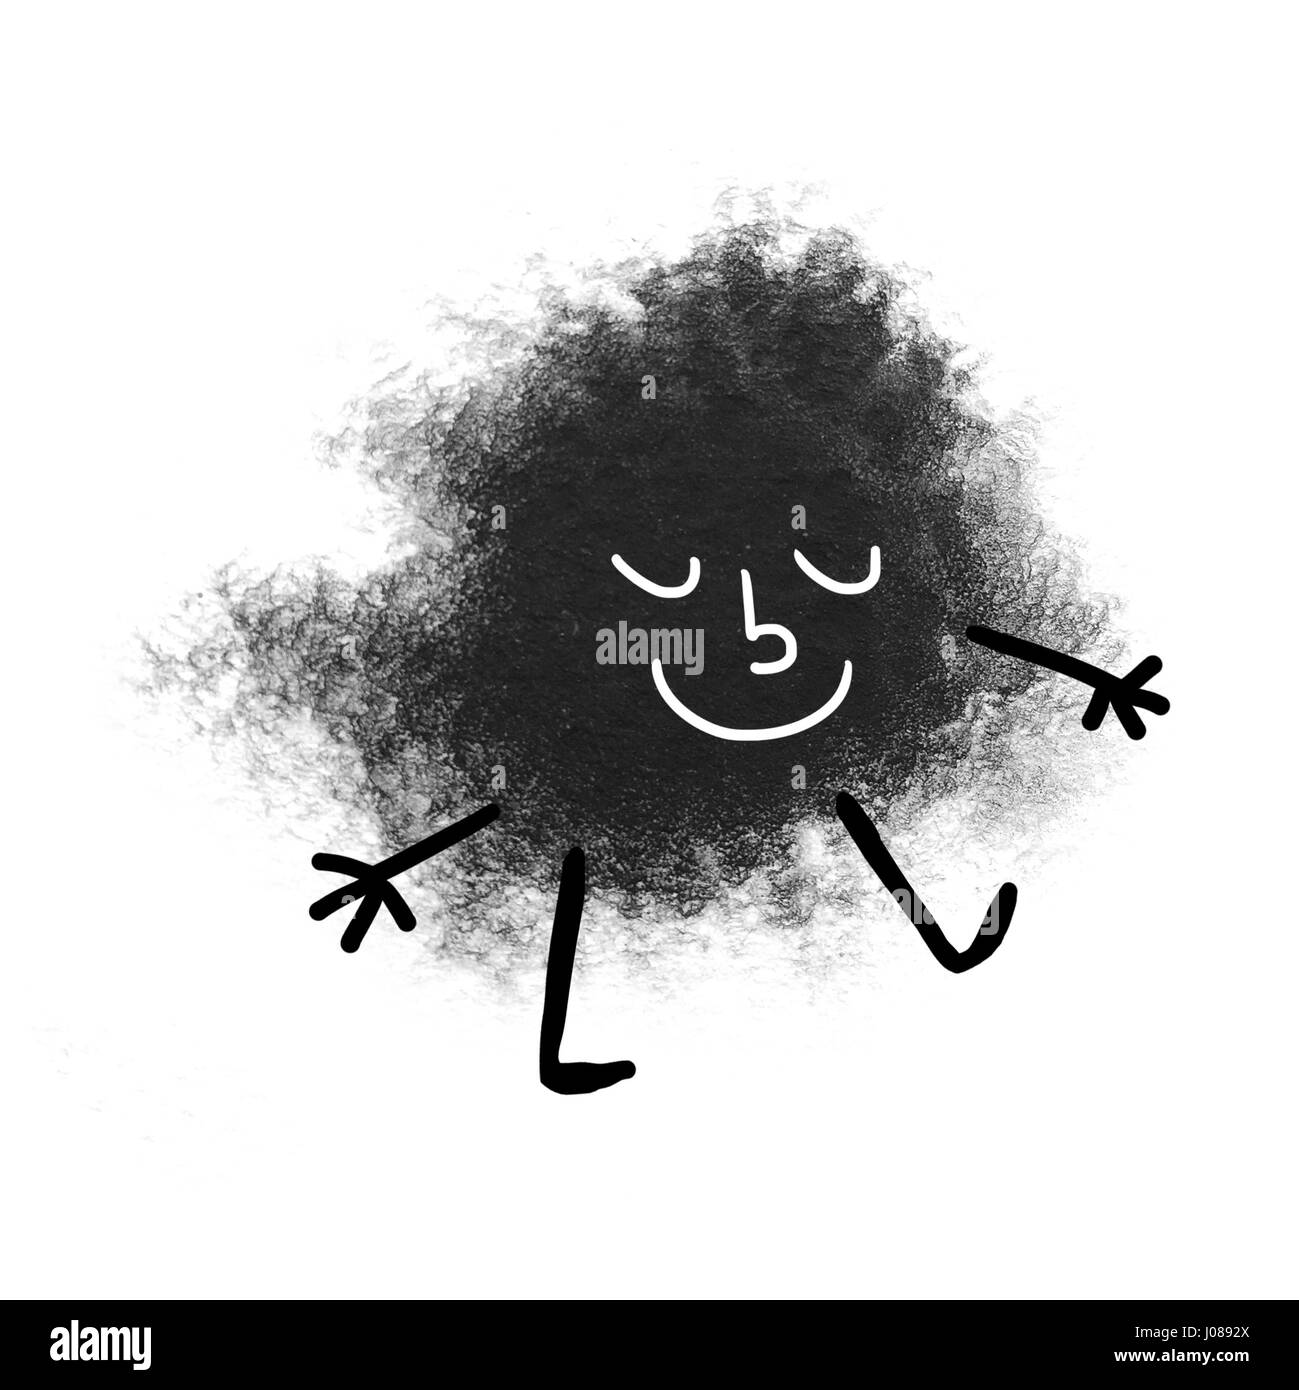 Cute face made with abstract watercolor blot isolated on white background. Hand drawn watercolor blot for your creativity. Stock Photo